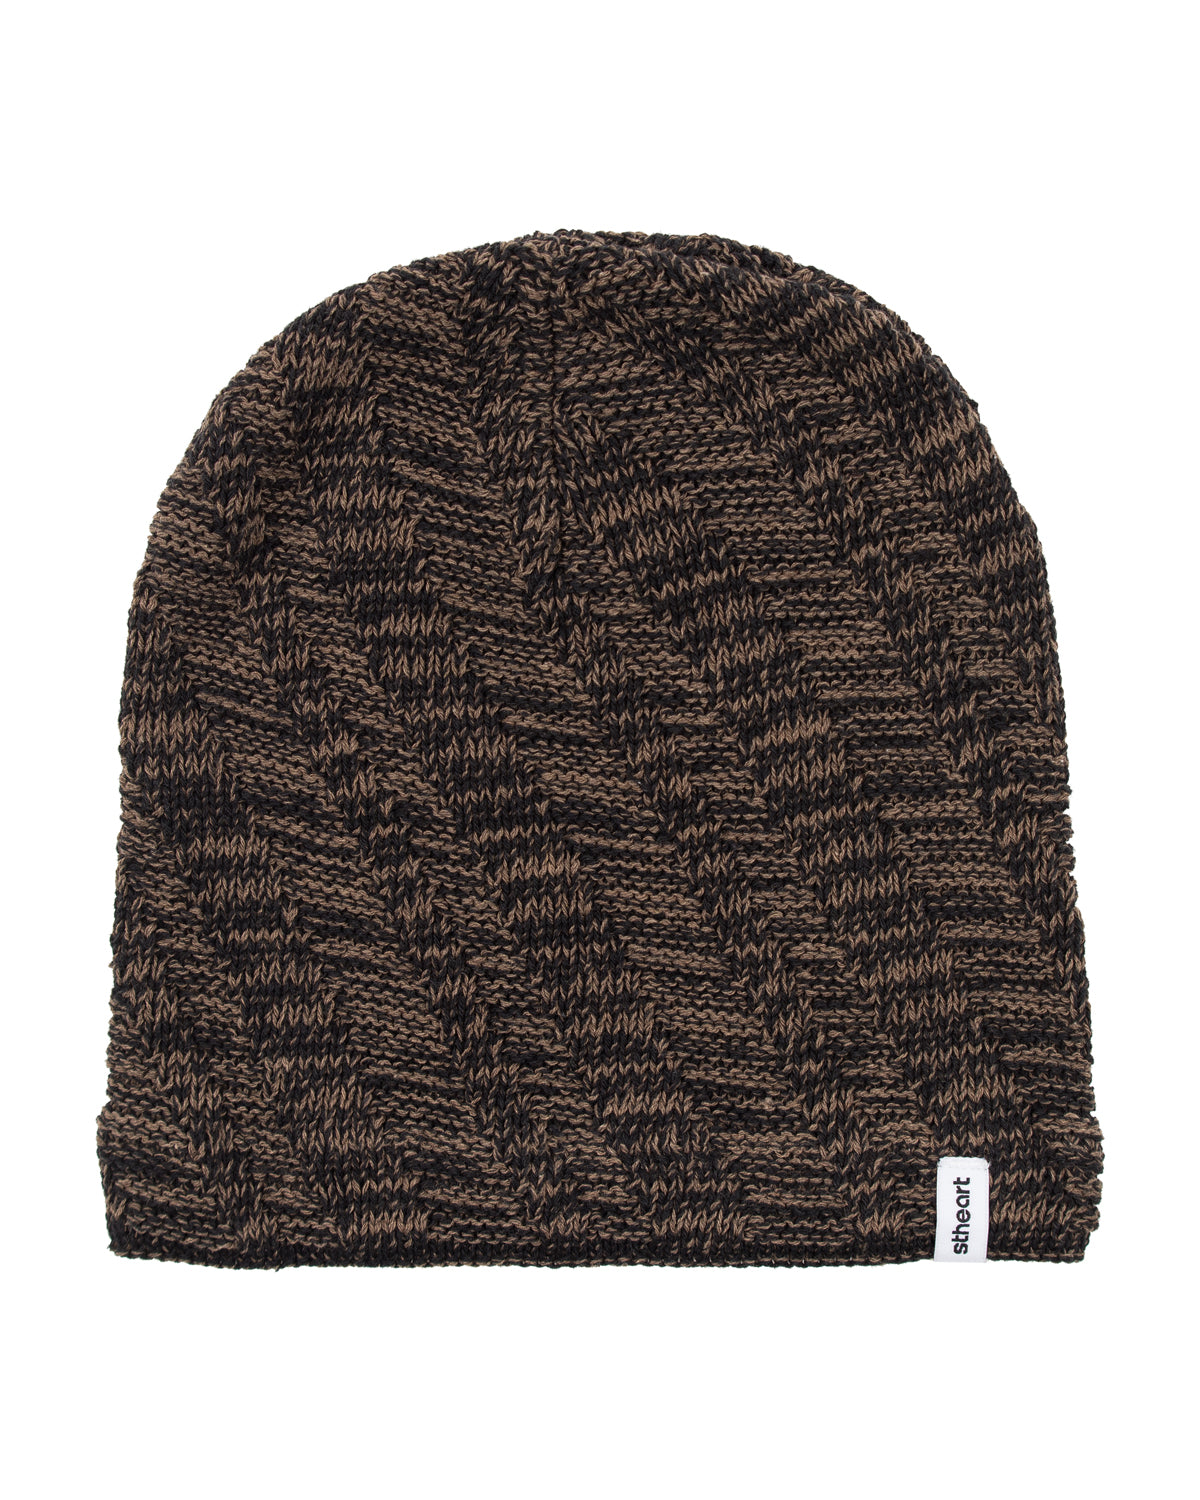 Staircase Slouch Beanie | Brown Onyx